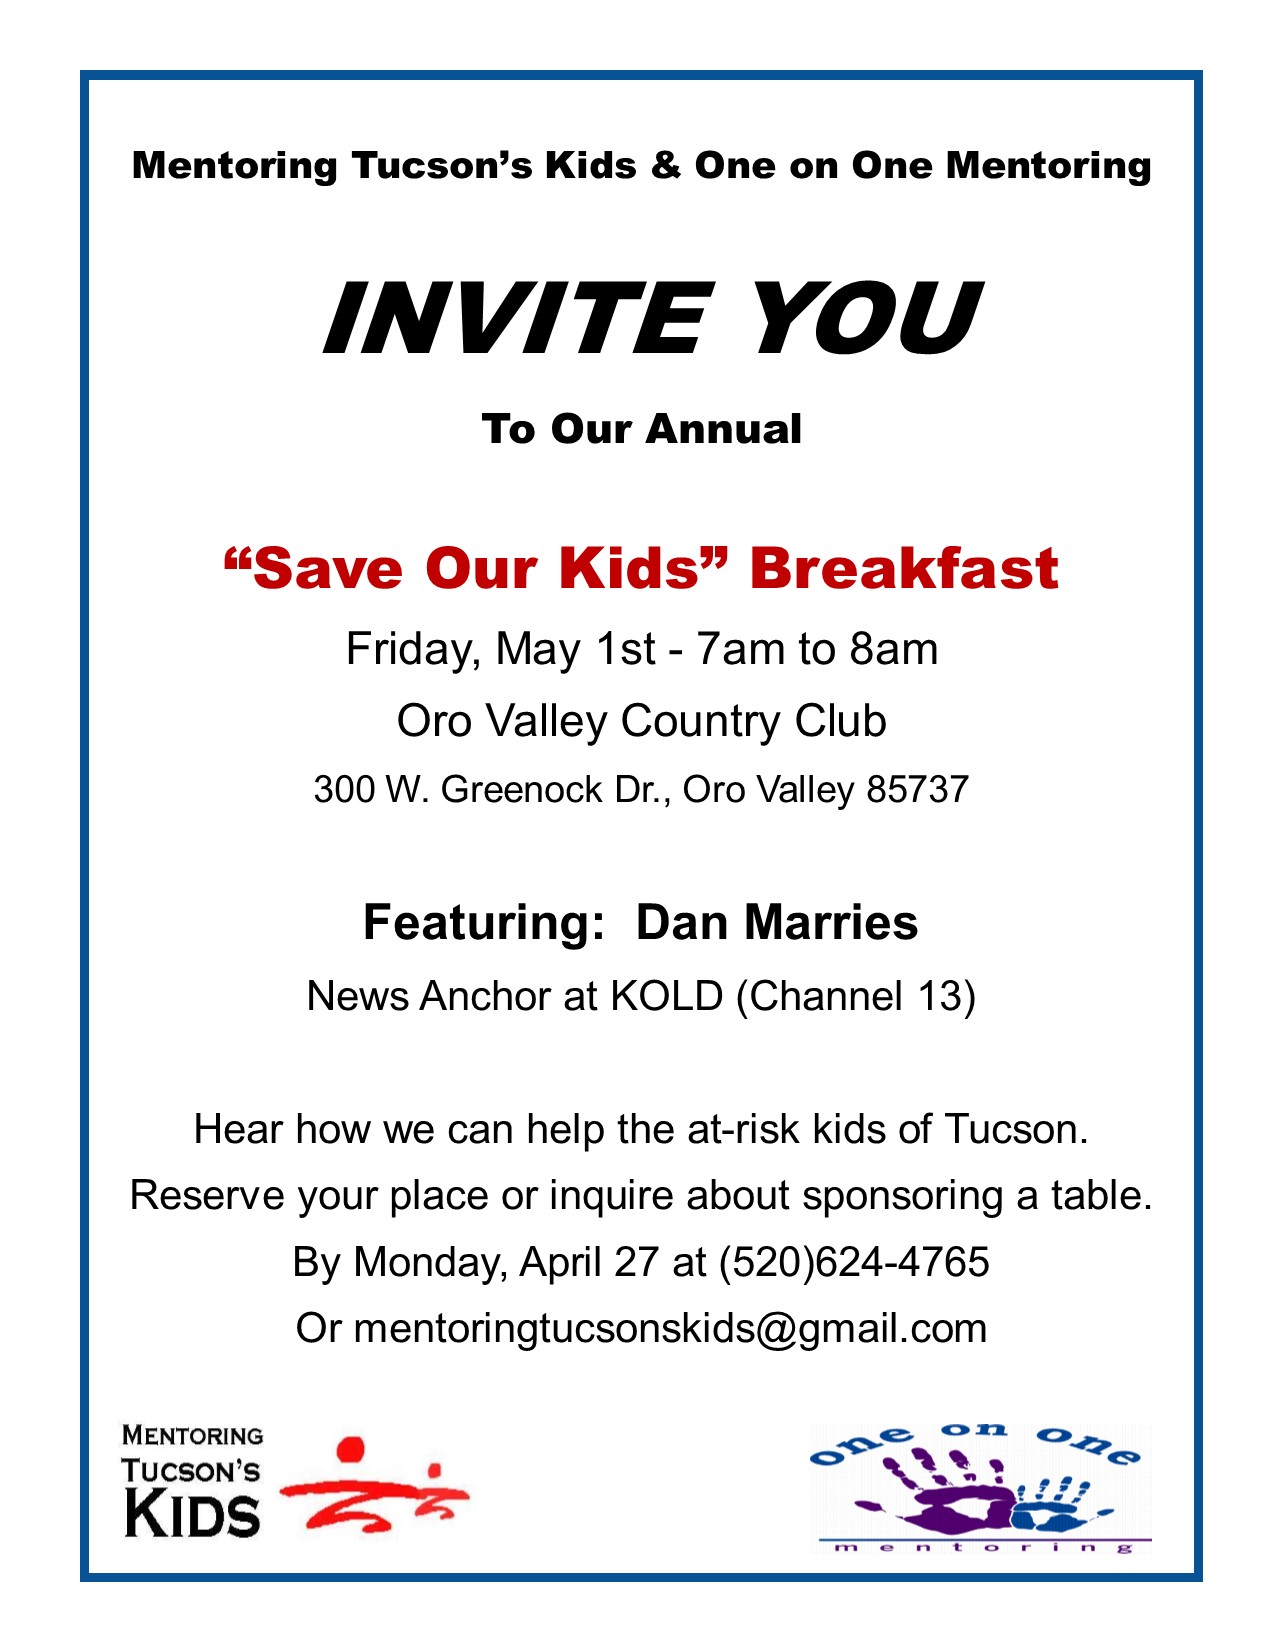 Save Our Kids Breakfast